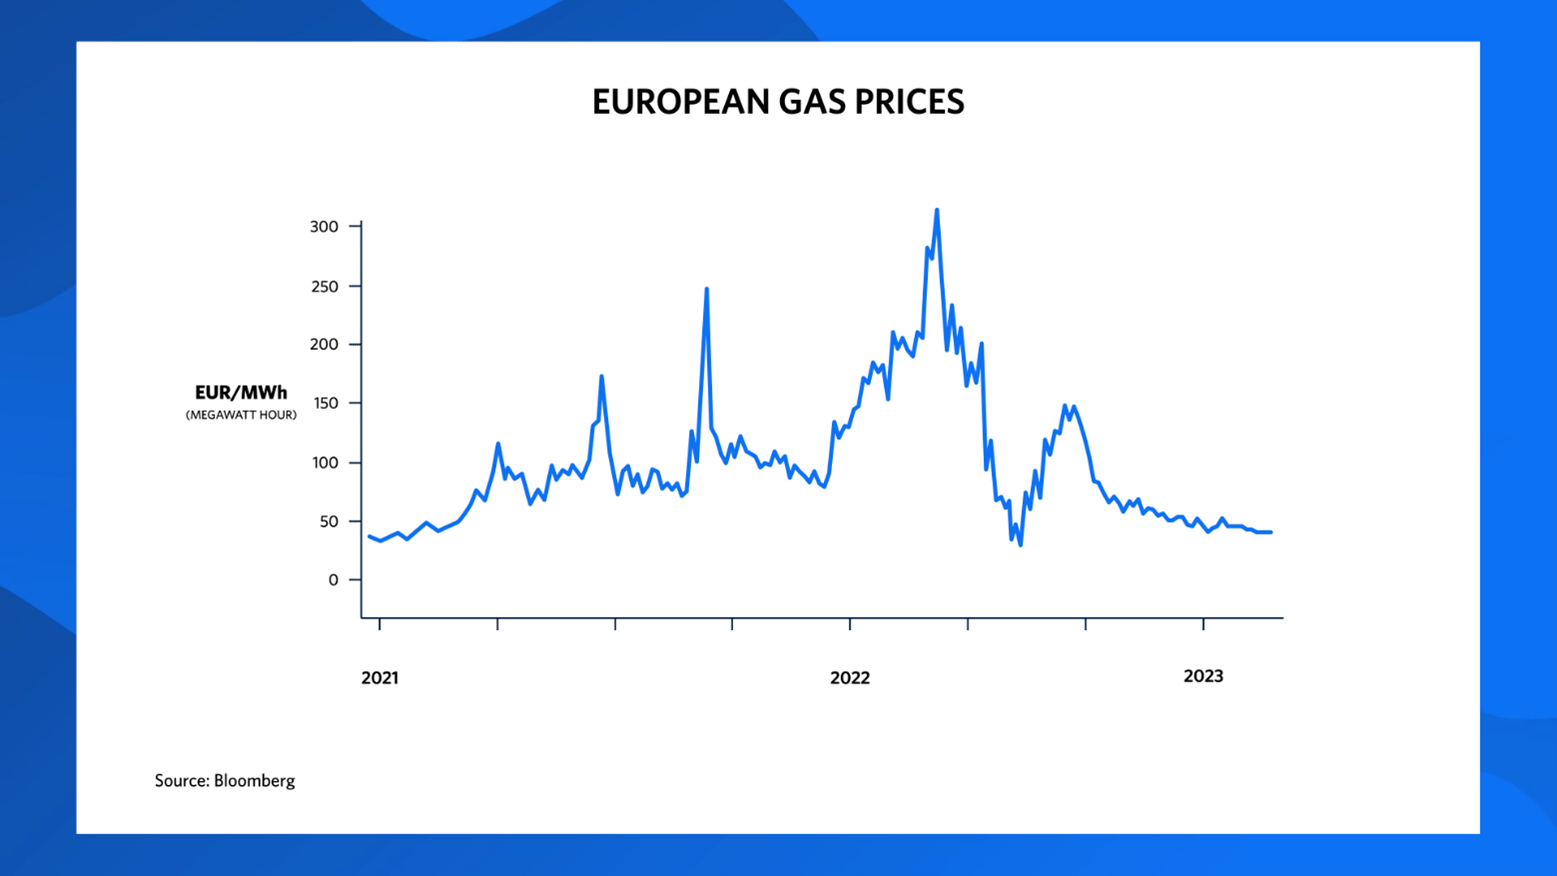 Image 1: A graph showing the price of gas peaking in 2022 at €300MWh megawatt hour before declining in 2023.